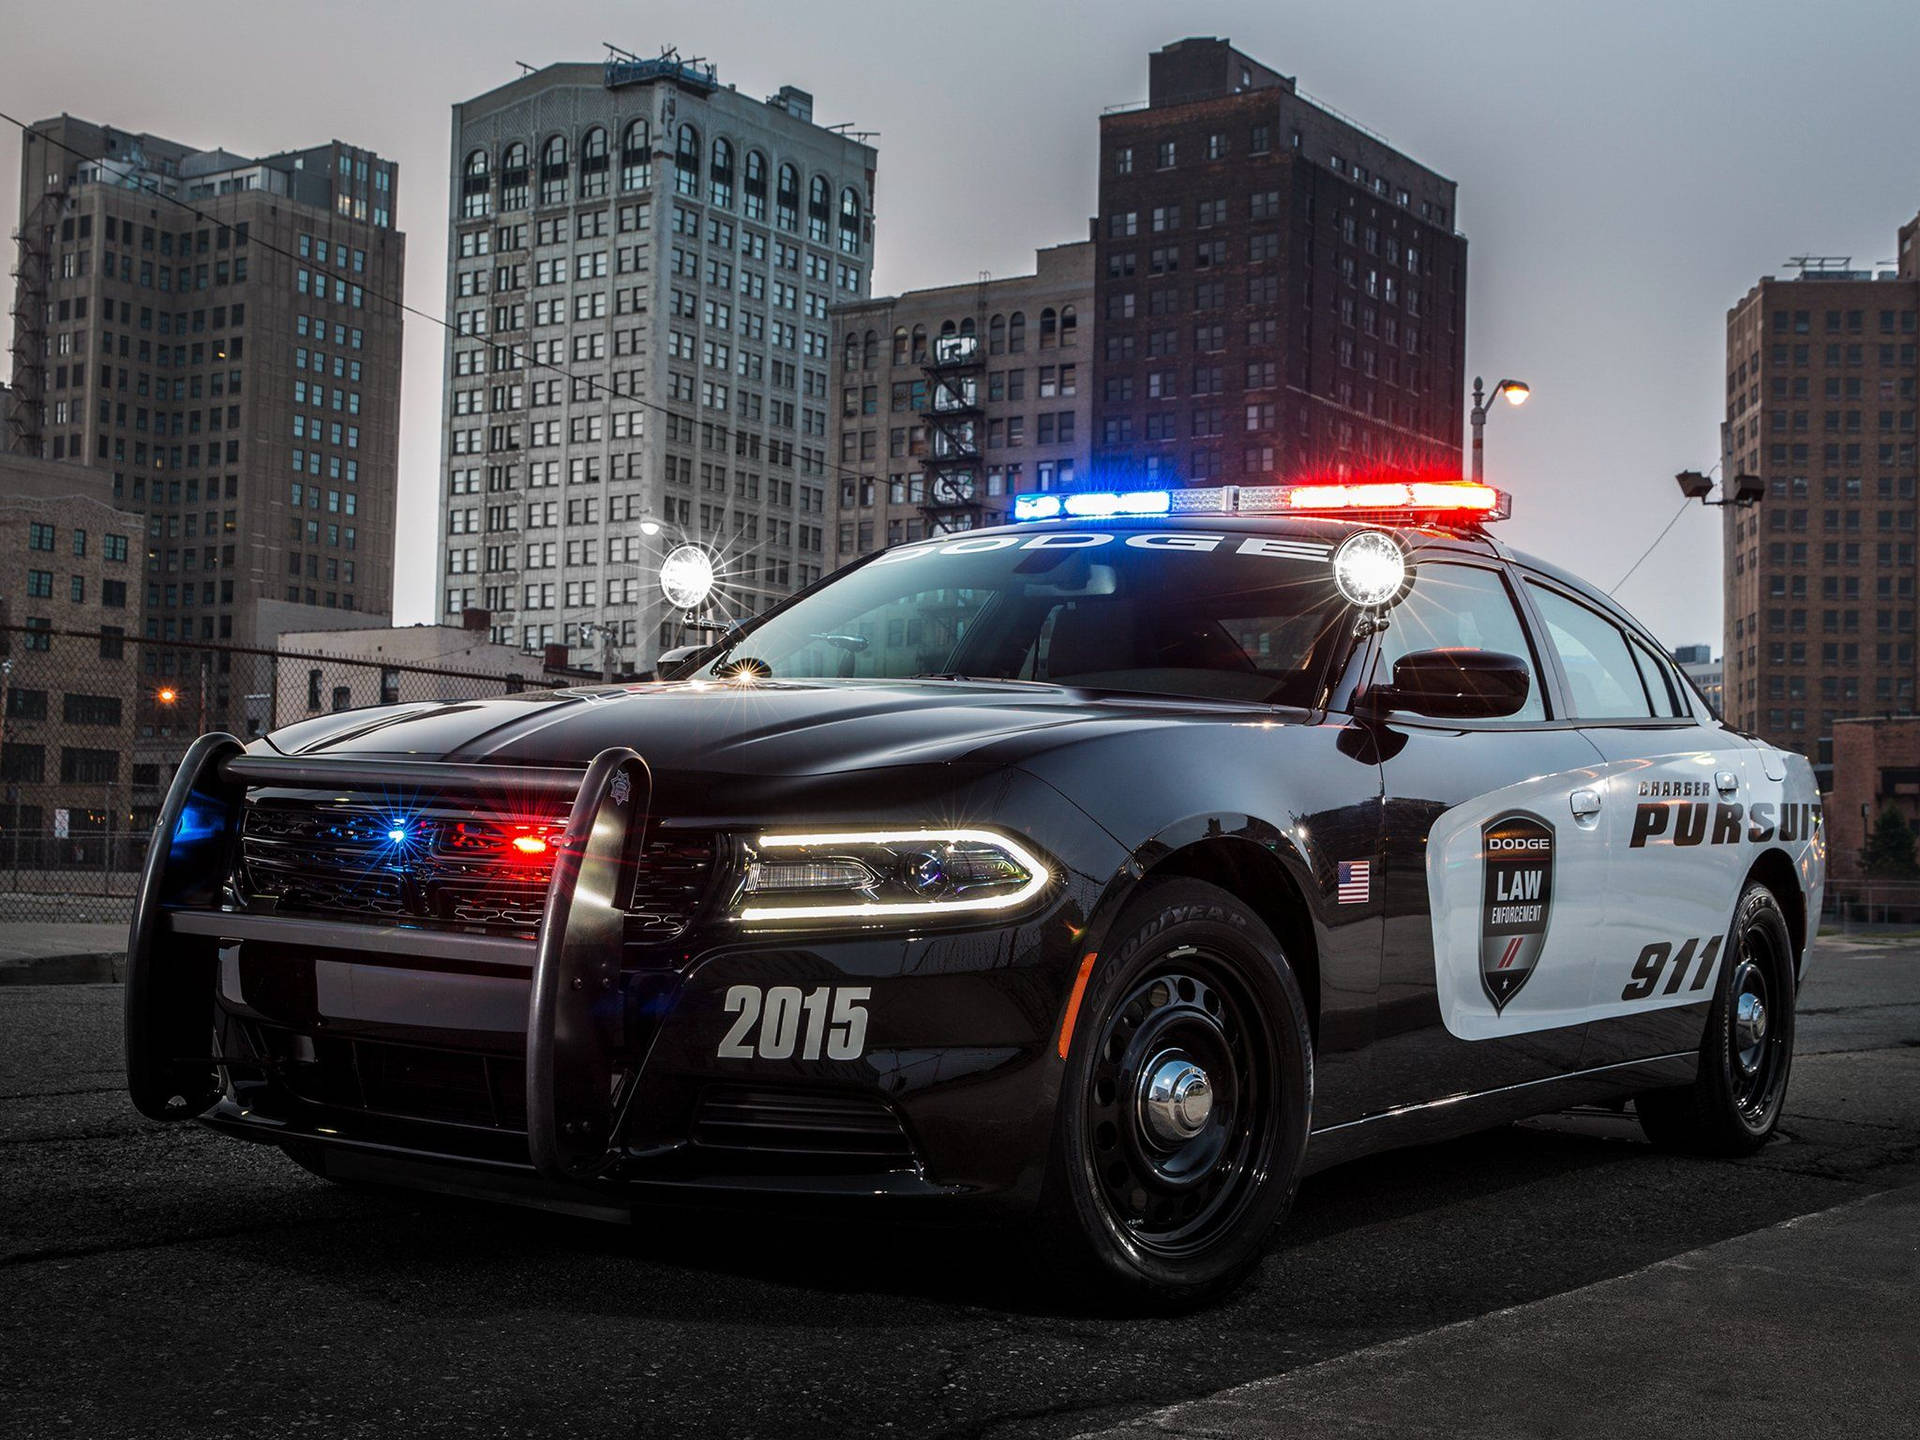 Police 2048X1536 Wallpaper and Background Image